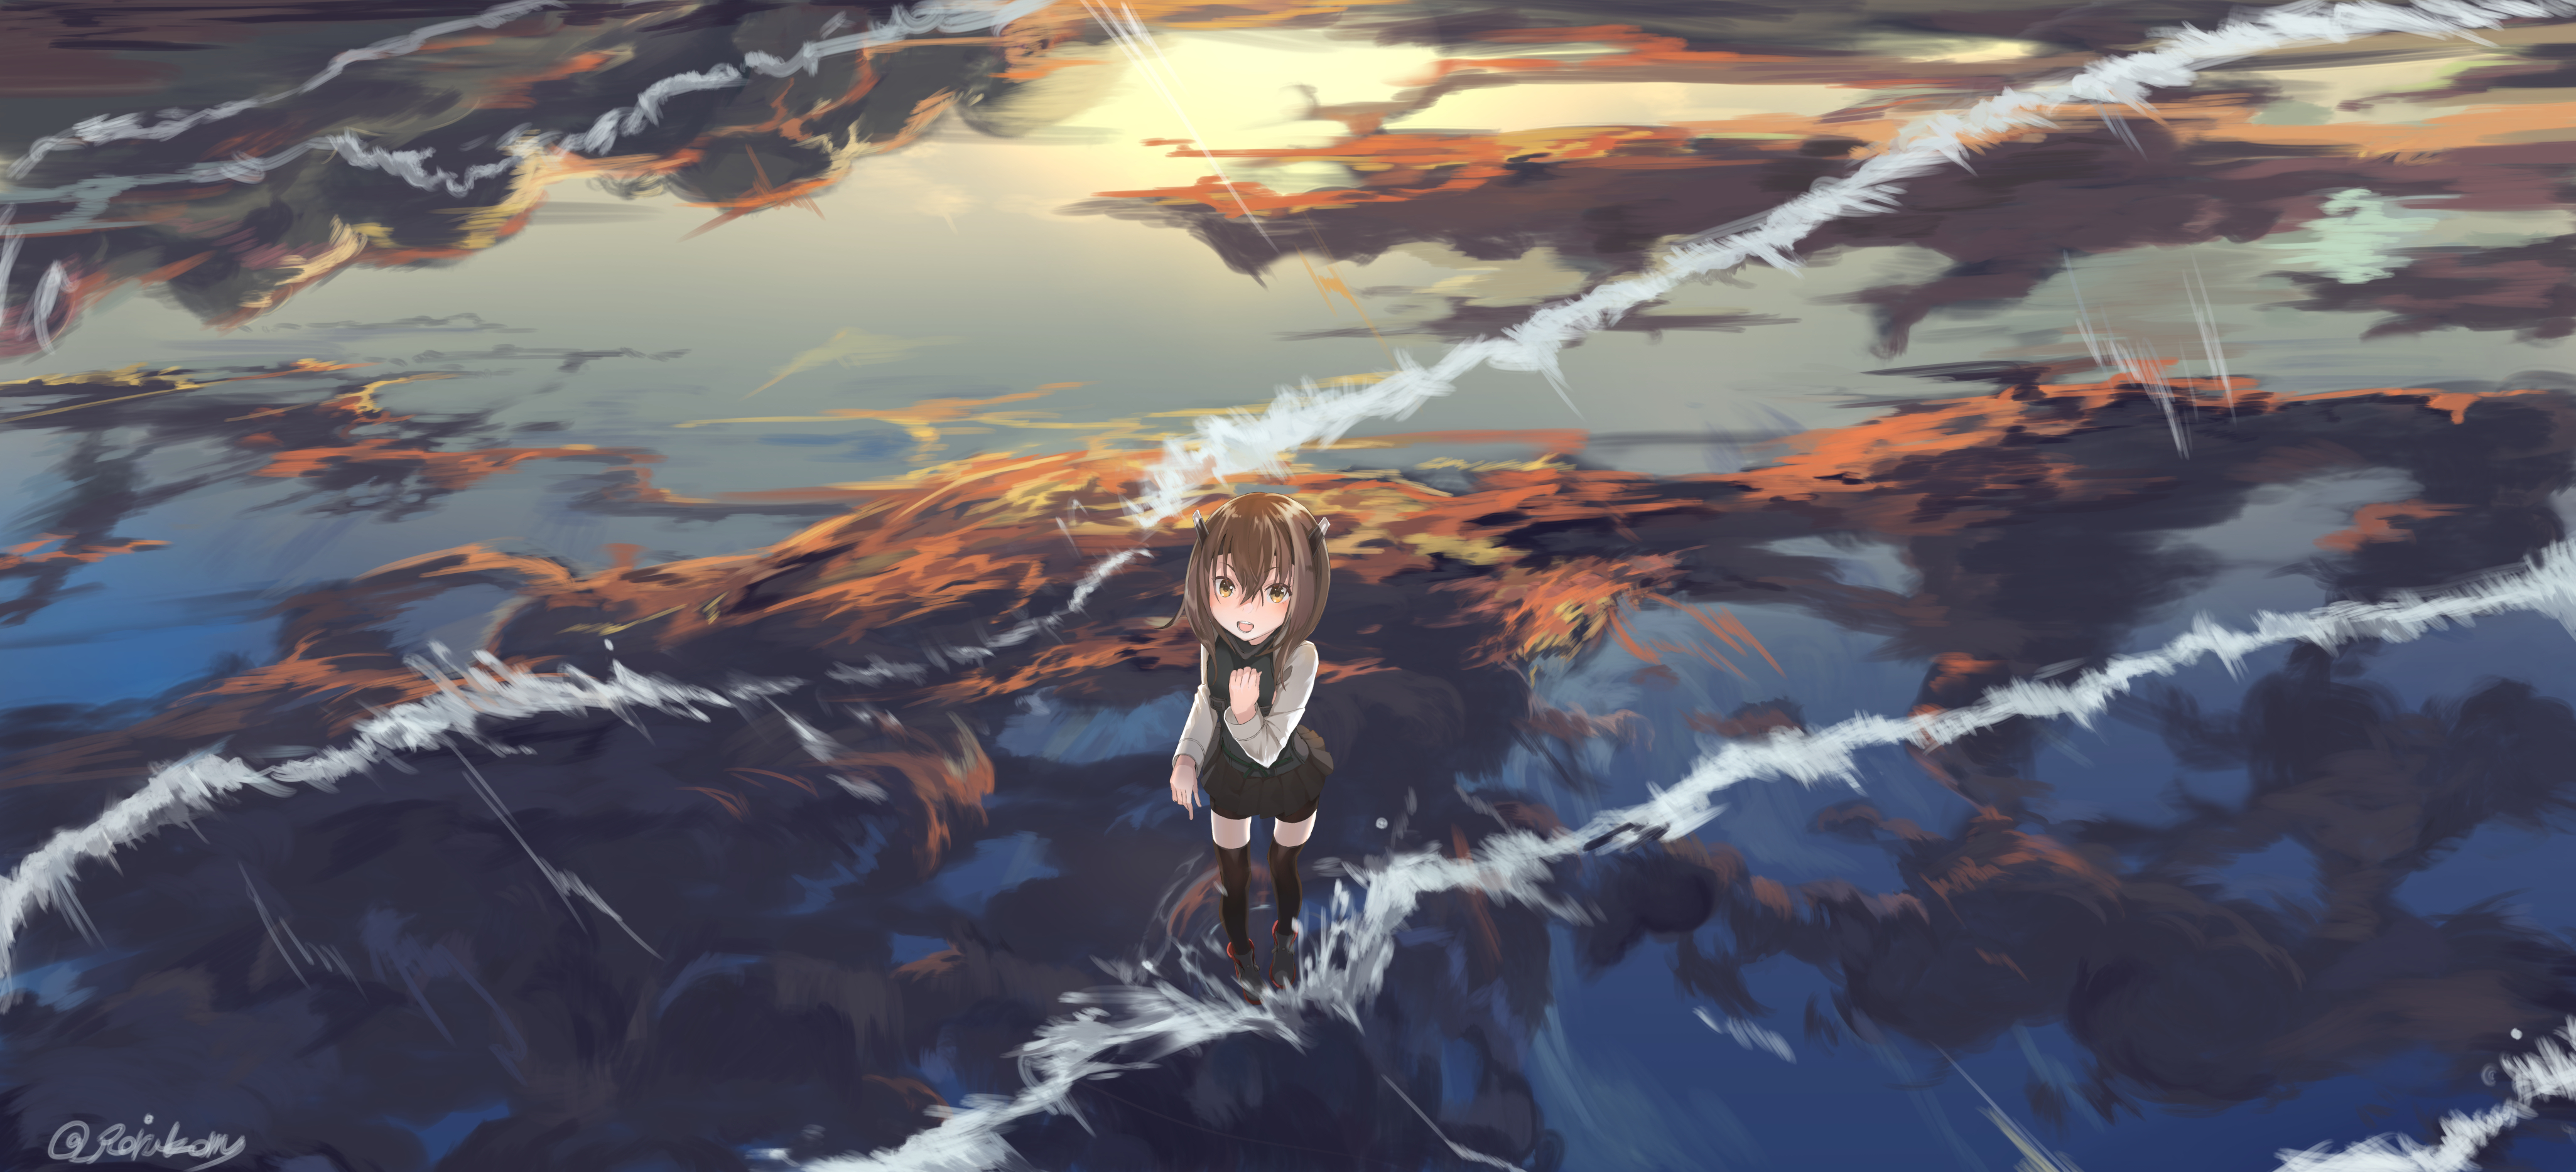 Kantai Collection Hd Wallpaper Background Image 4102x1867 Wallpaper Abyss